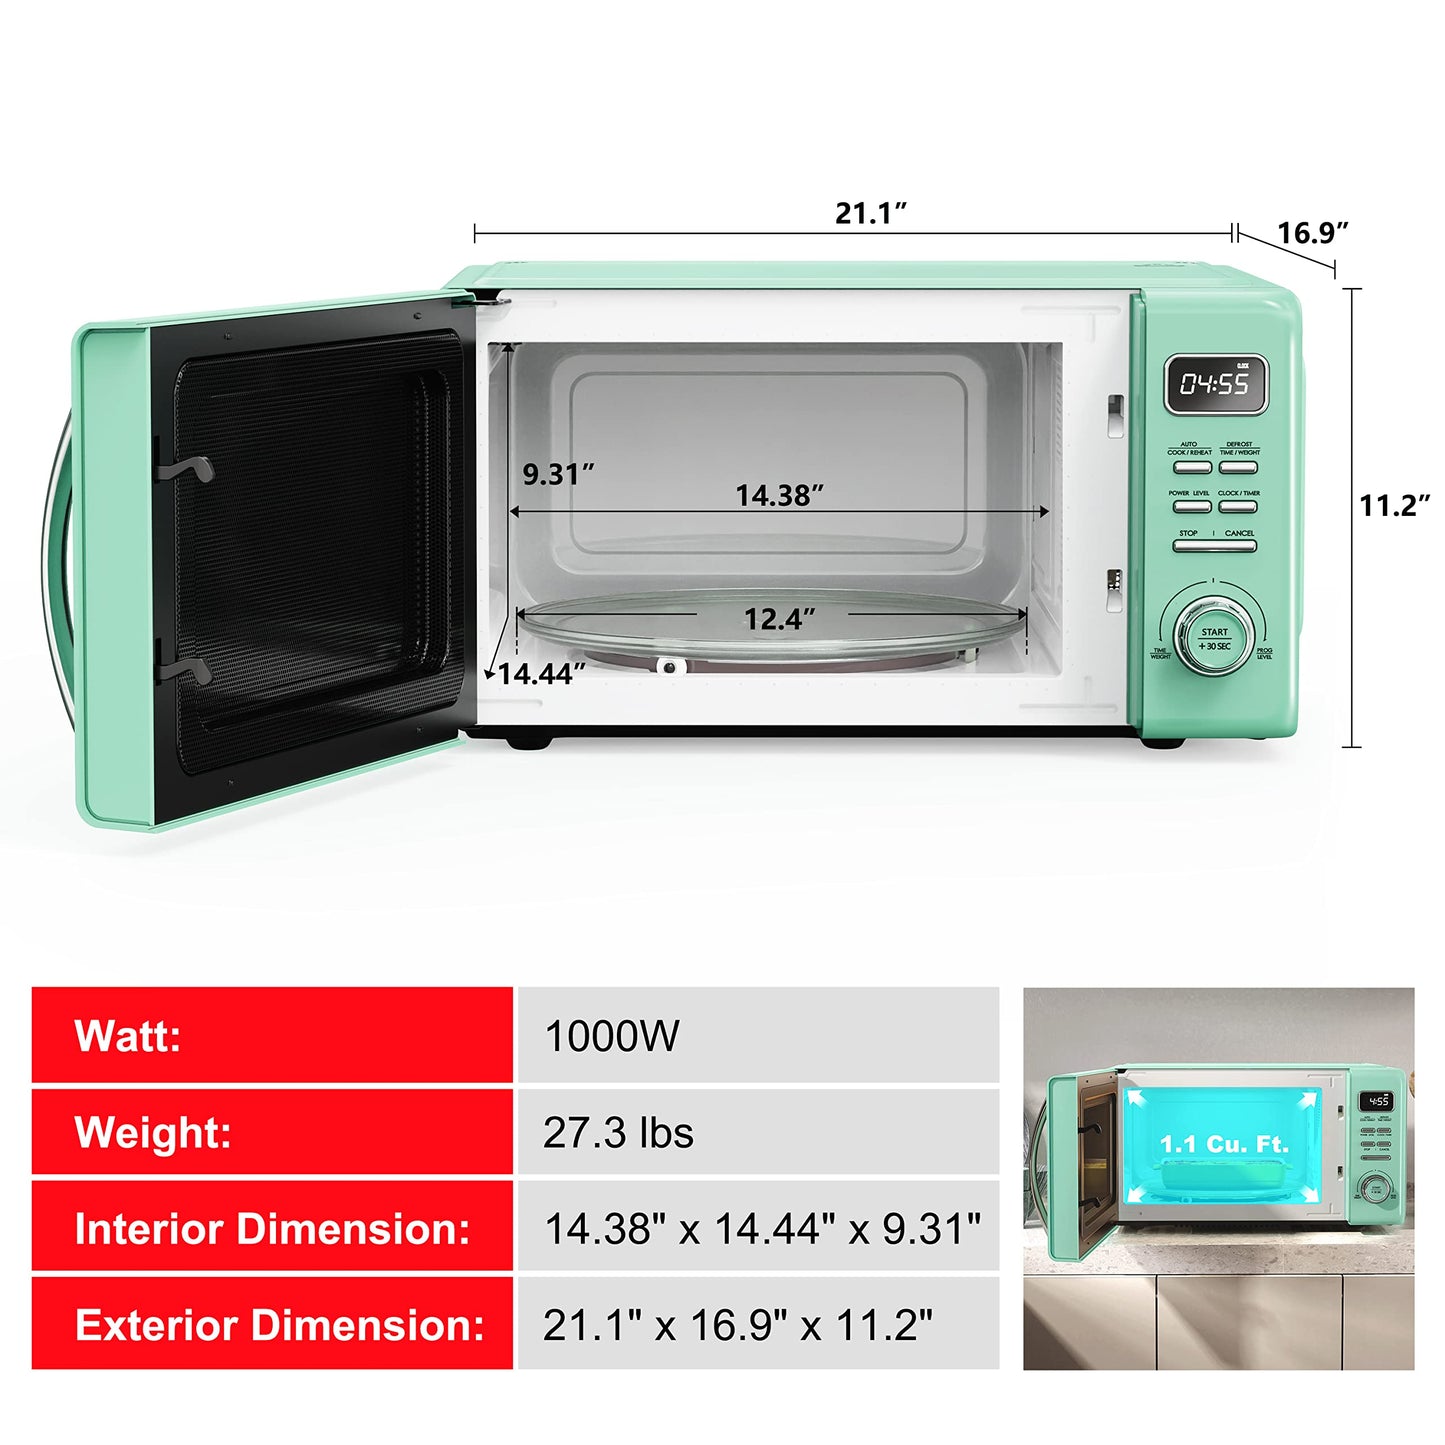 Galanz GLCMKZ11GNR10 Retro Countertop Microwave Oven with Auto Cook & Reheat, Defrost, Quick Start Functions, Easy Clean with Glass Turntable, Pull Handle, 1.1 cu ft, Green